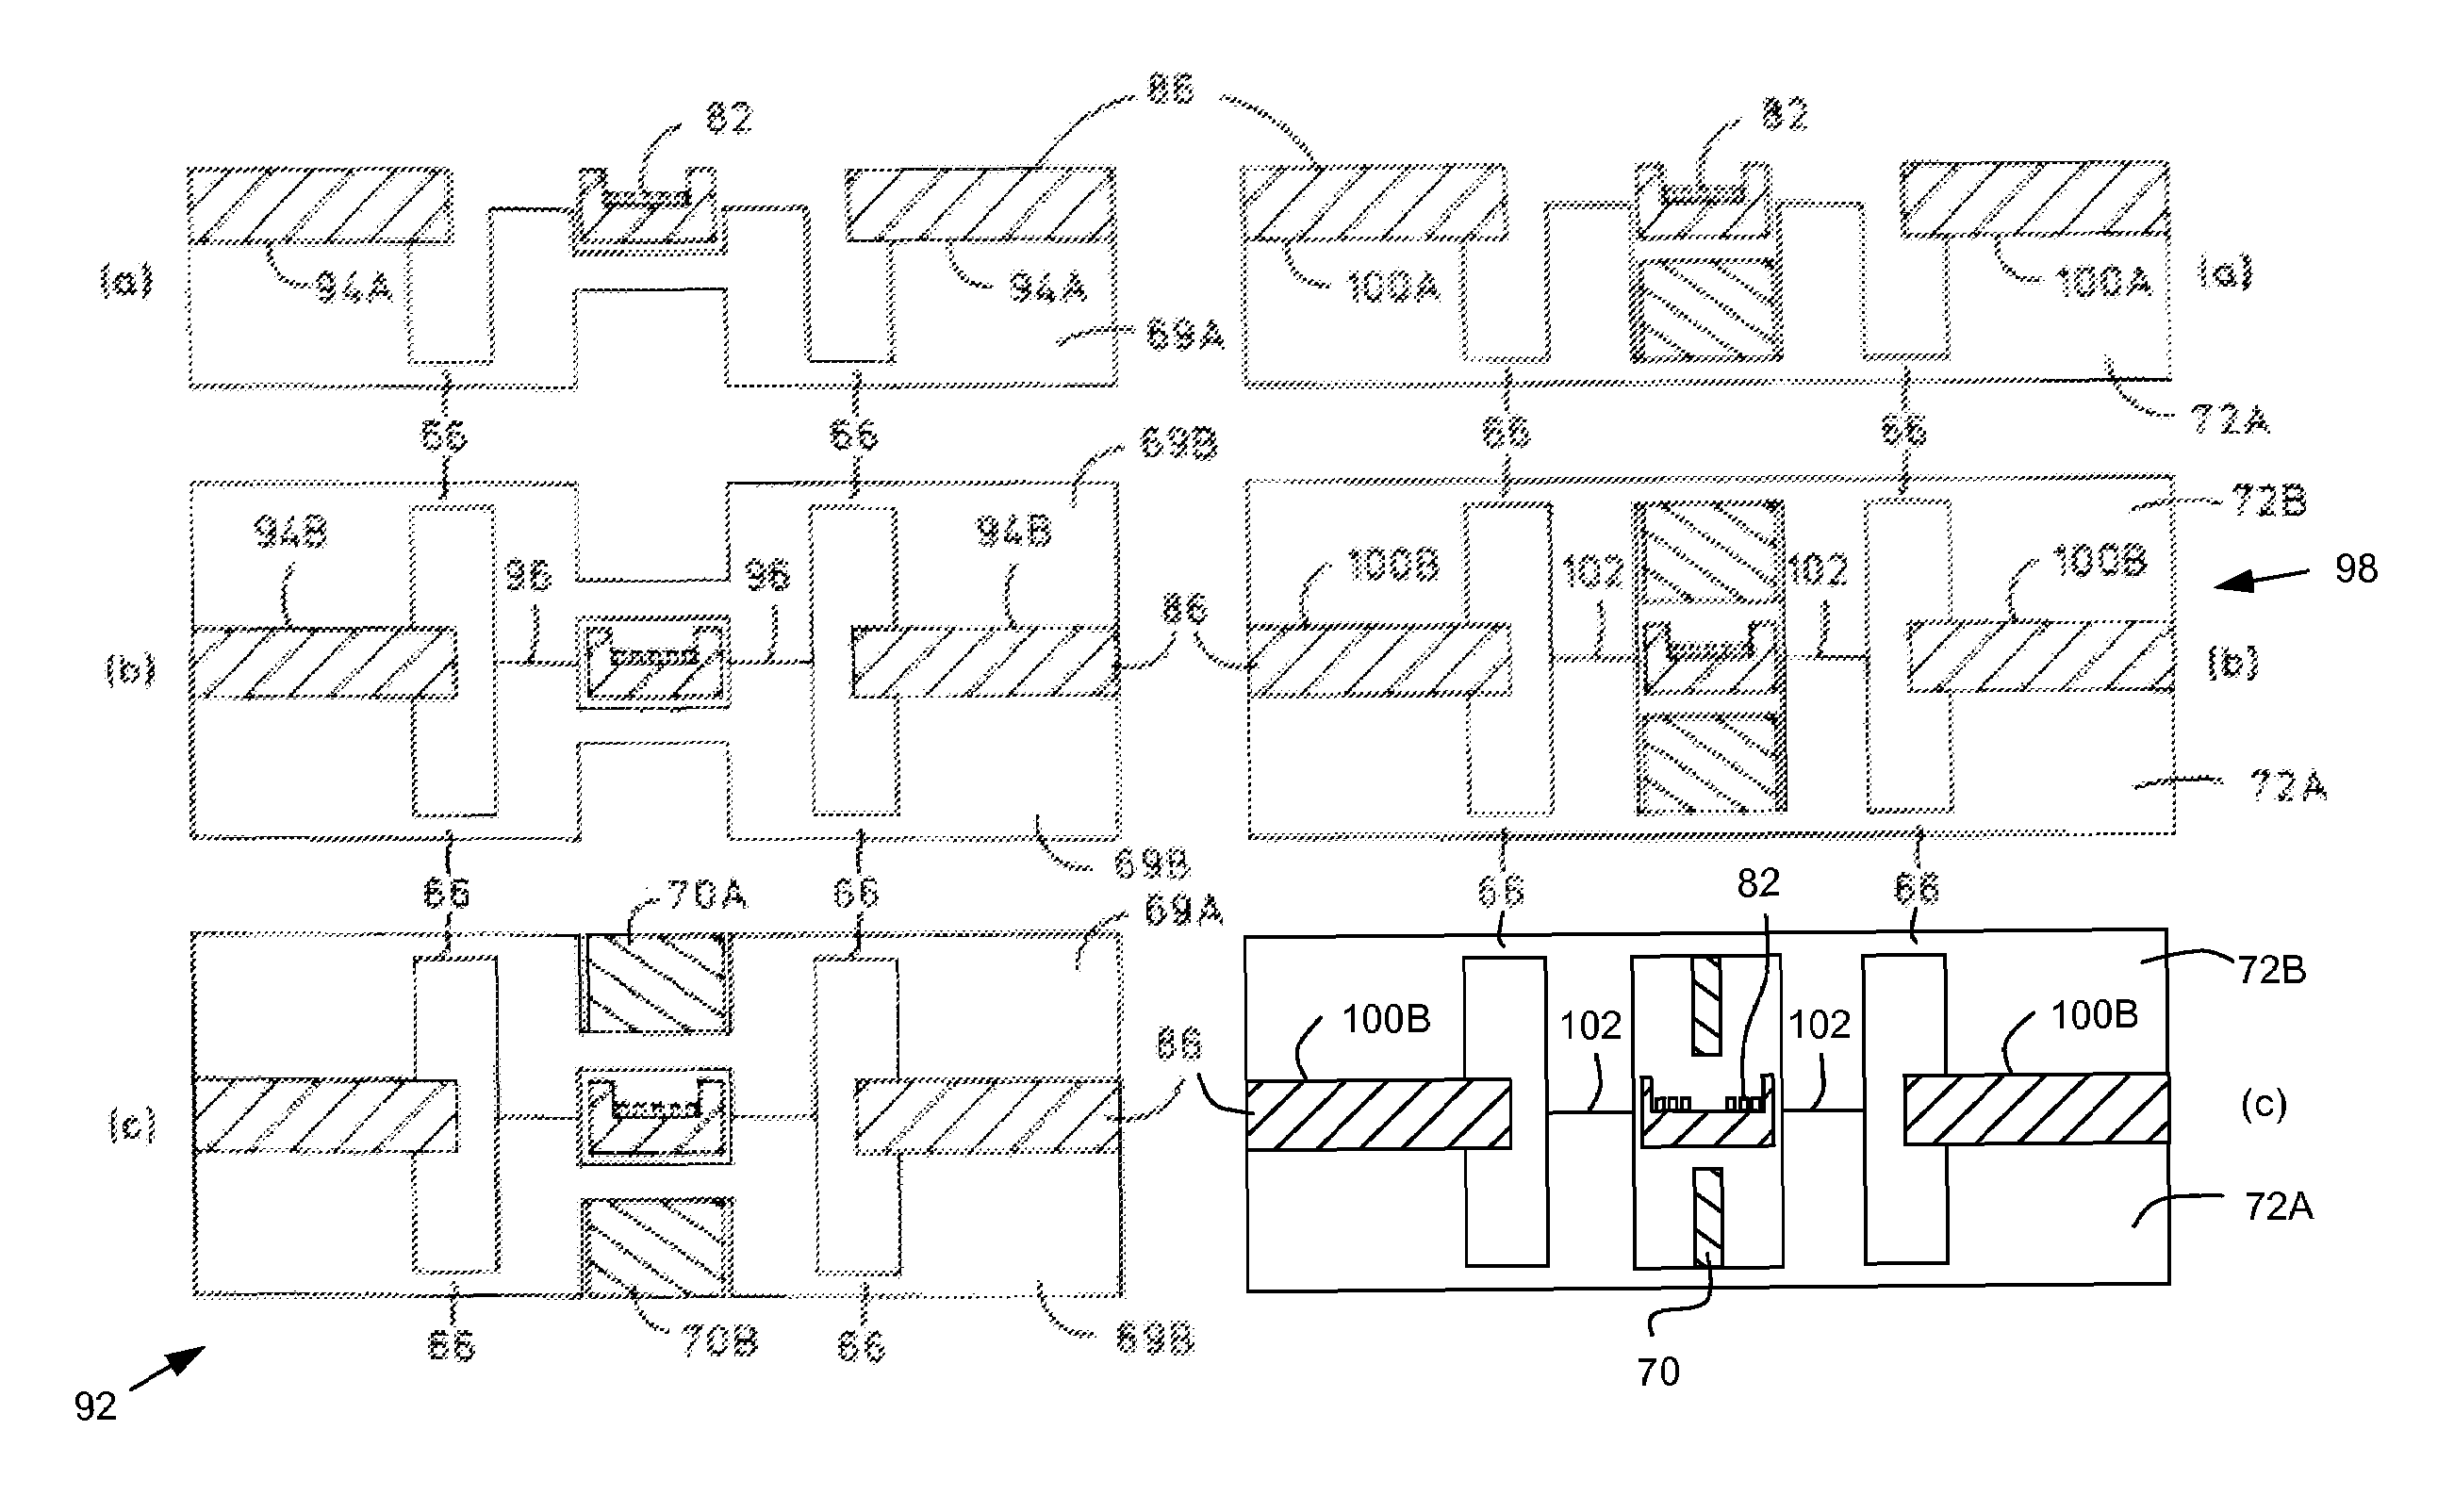 Apparatus for generating power responsive to mechanical vibration